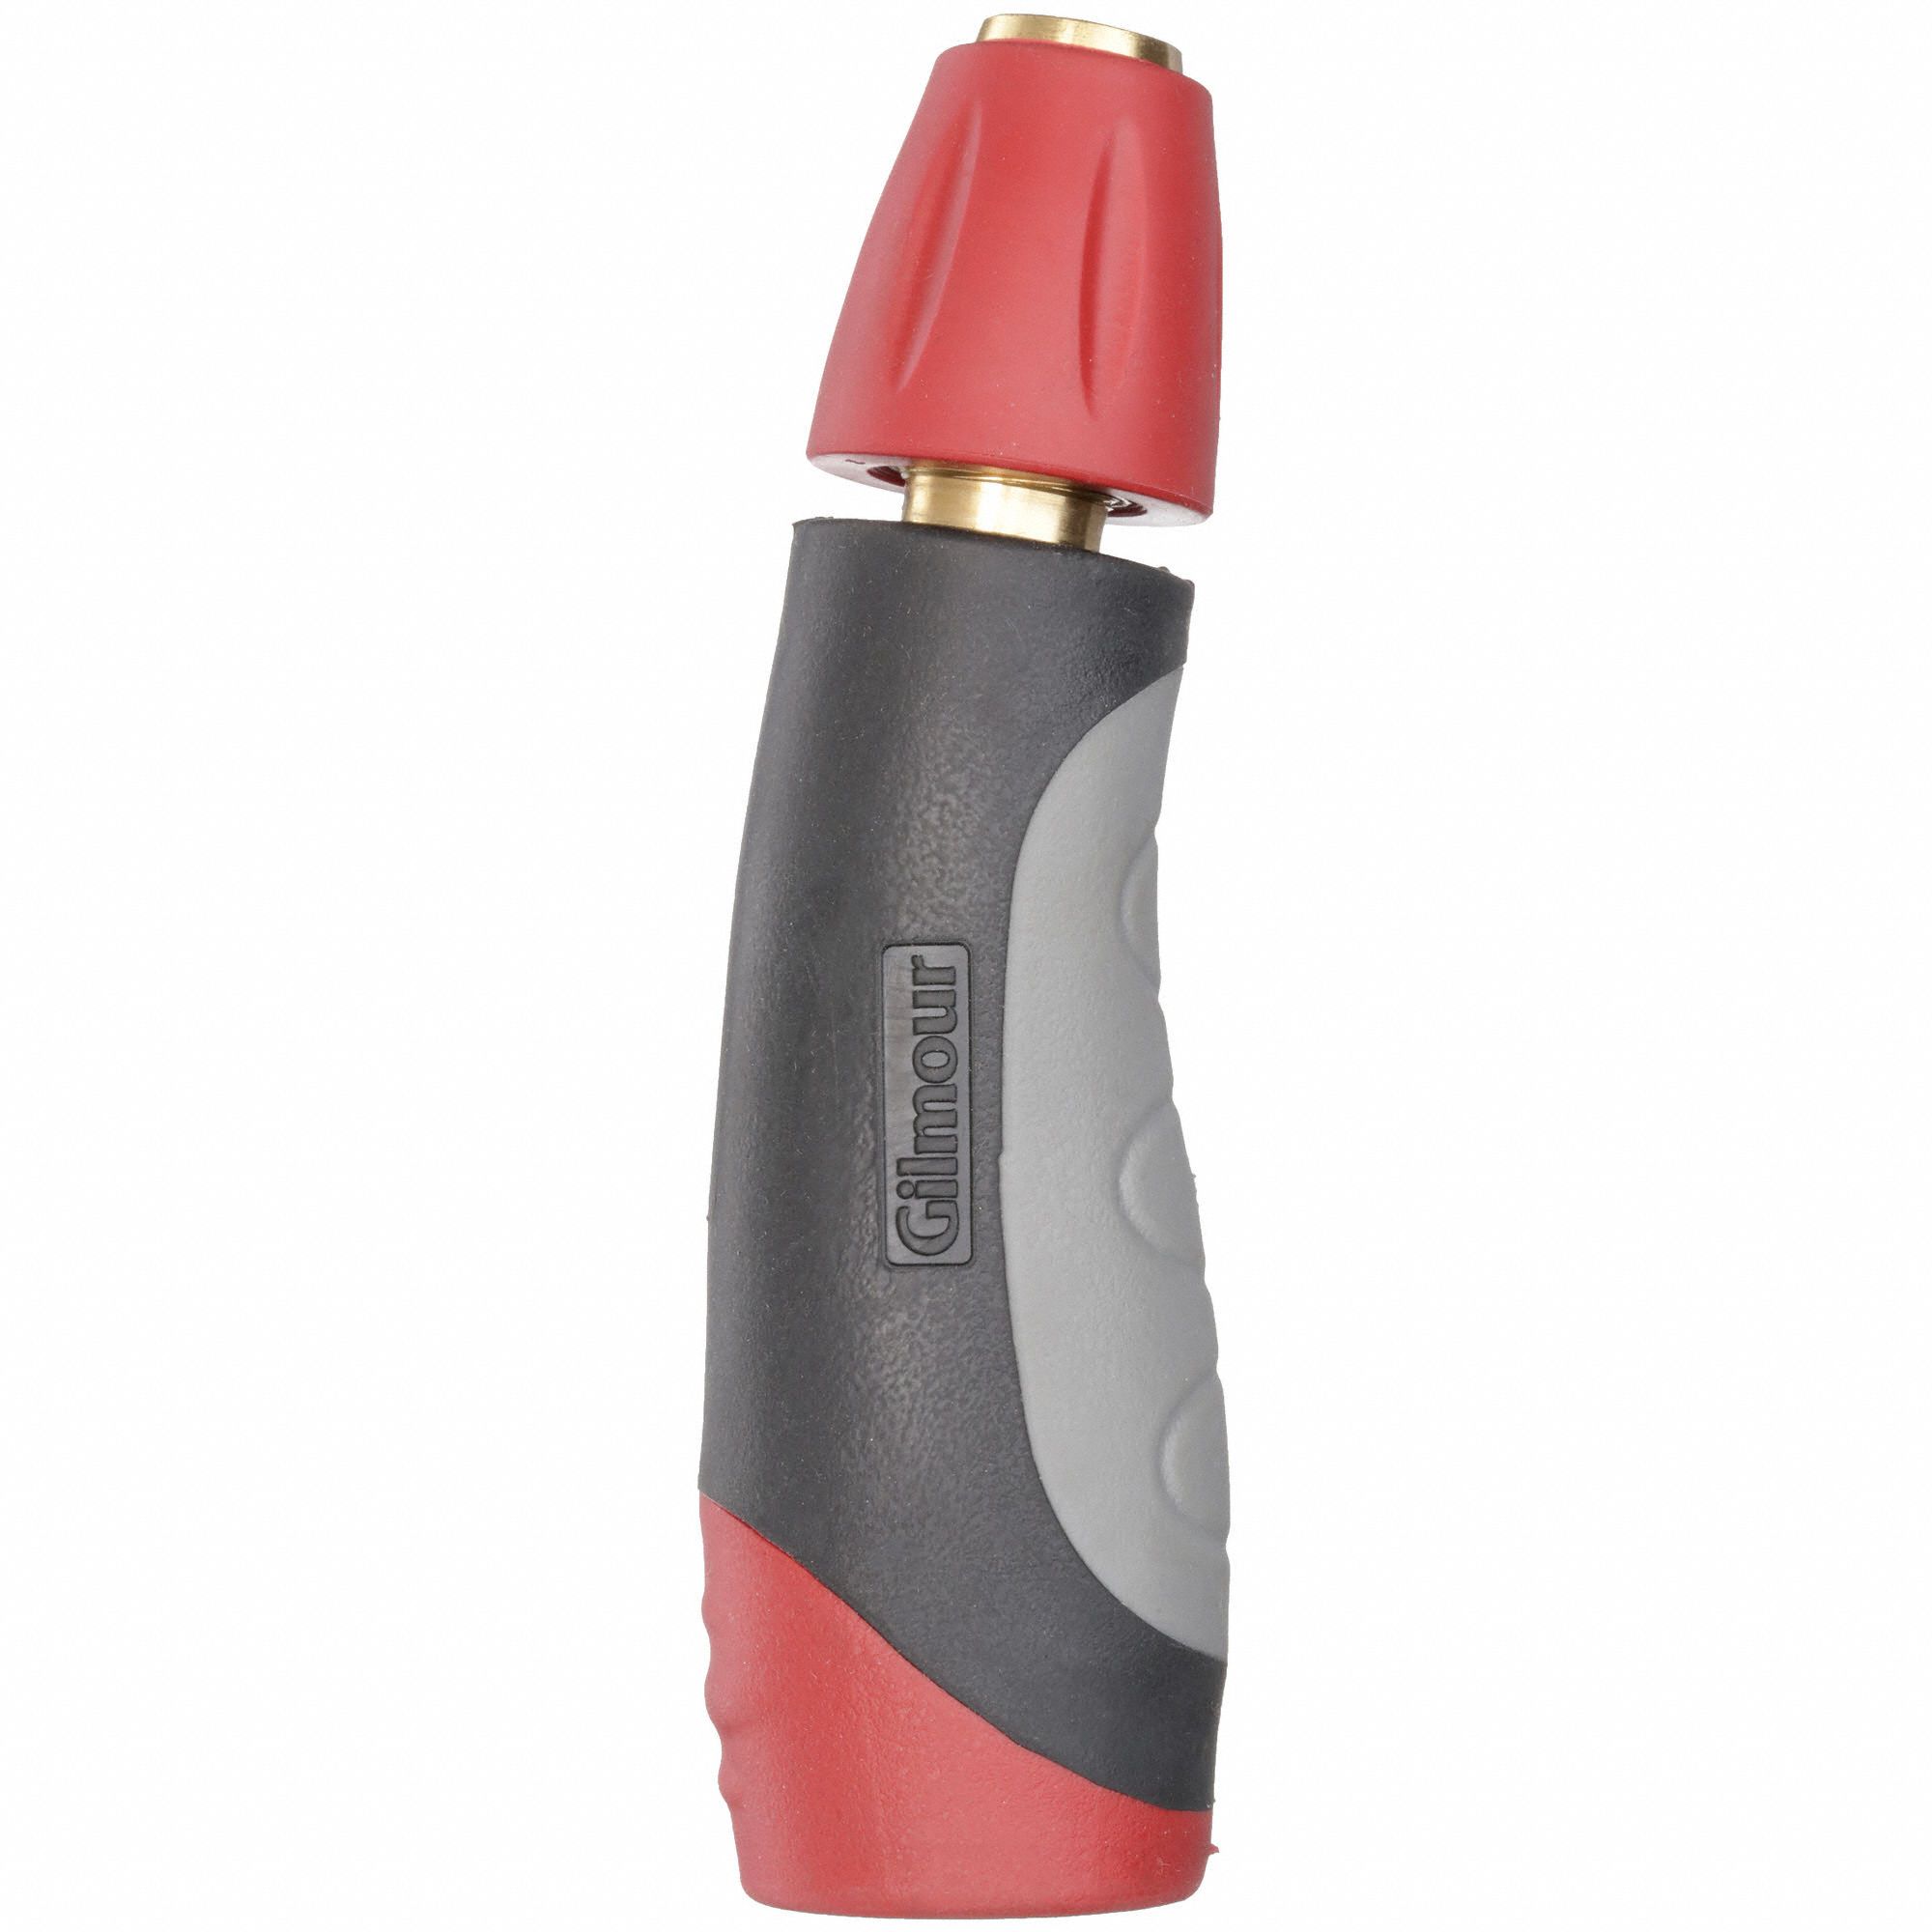 Water Nozzle, Red/Black/Grey